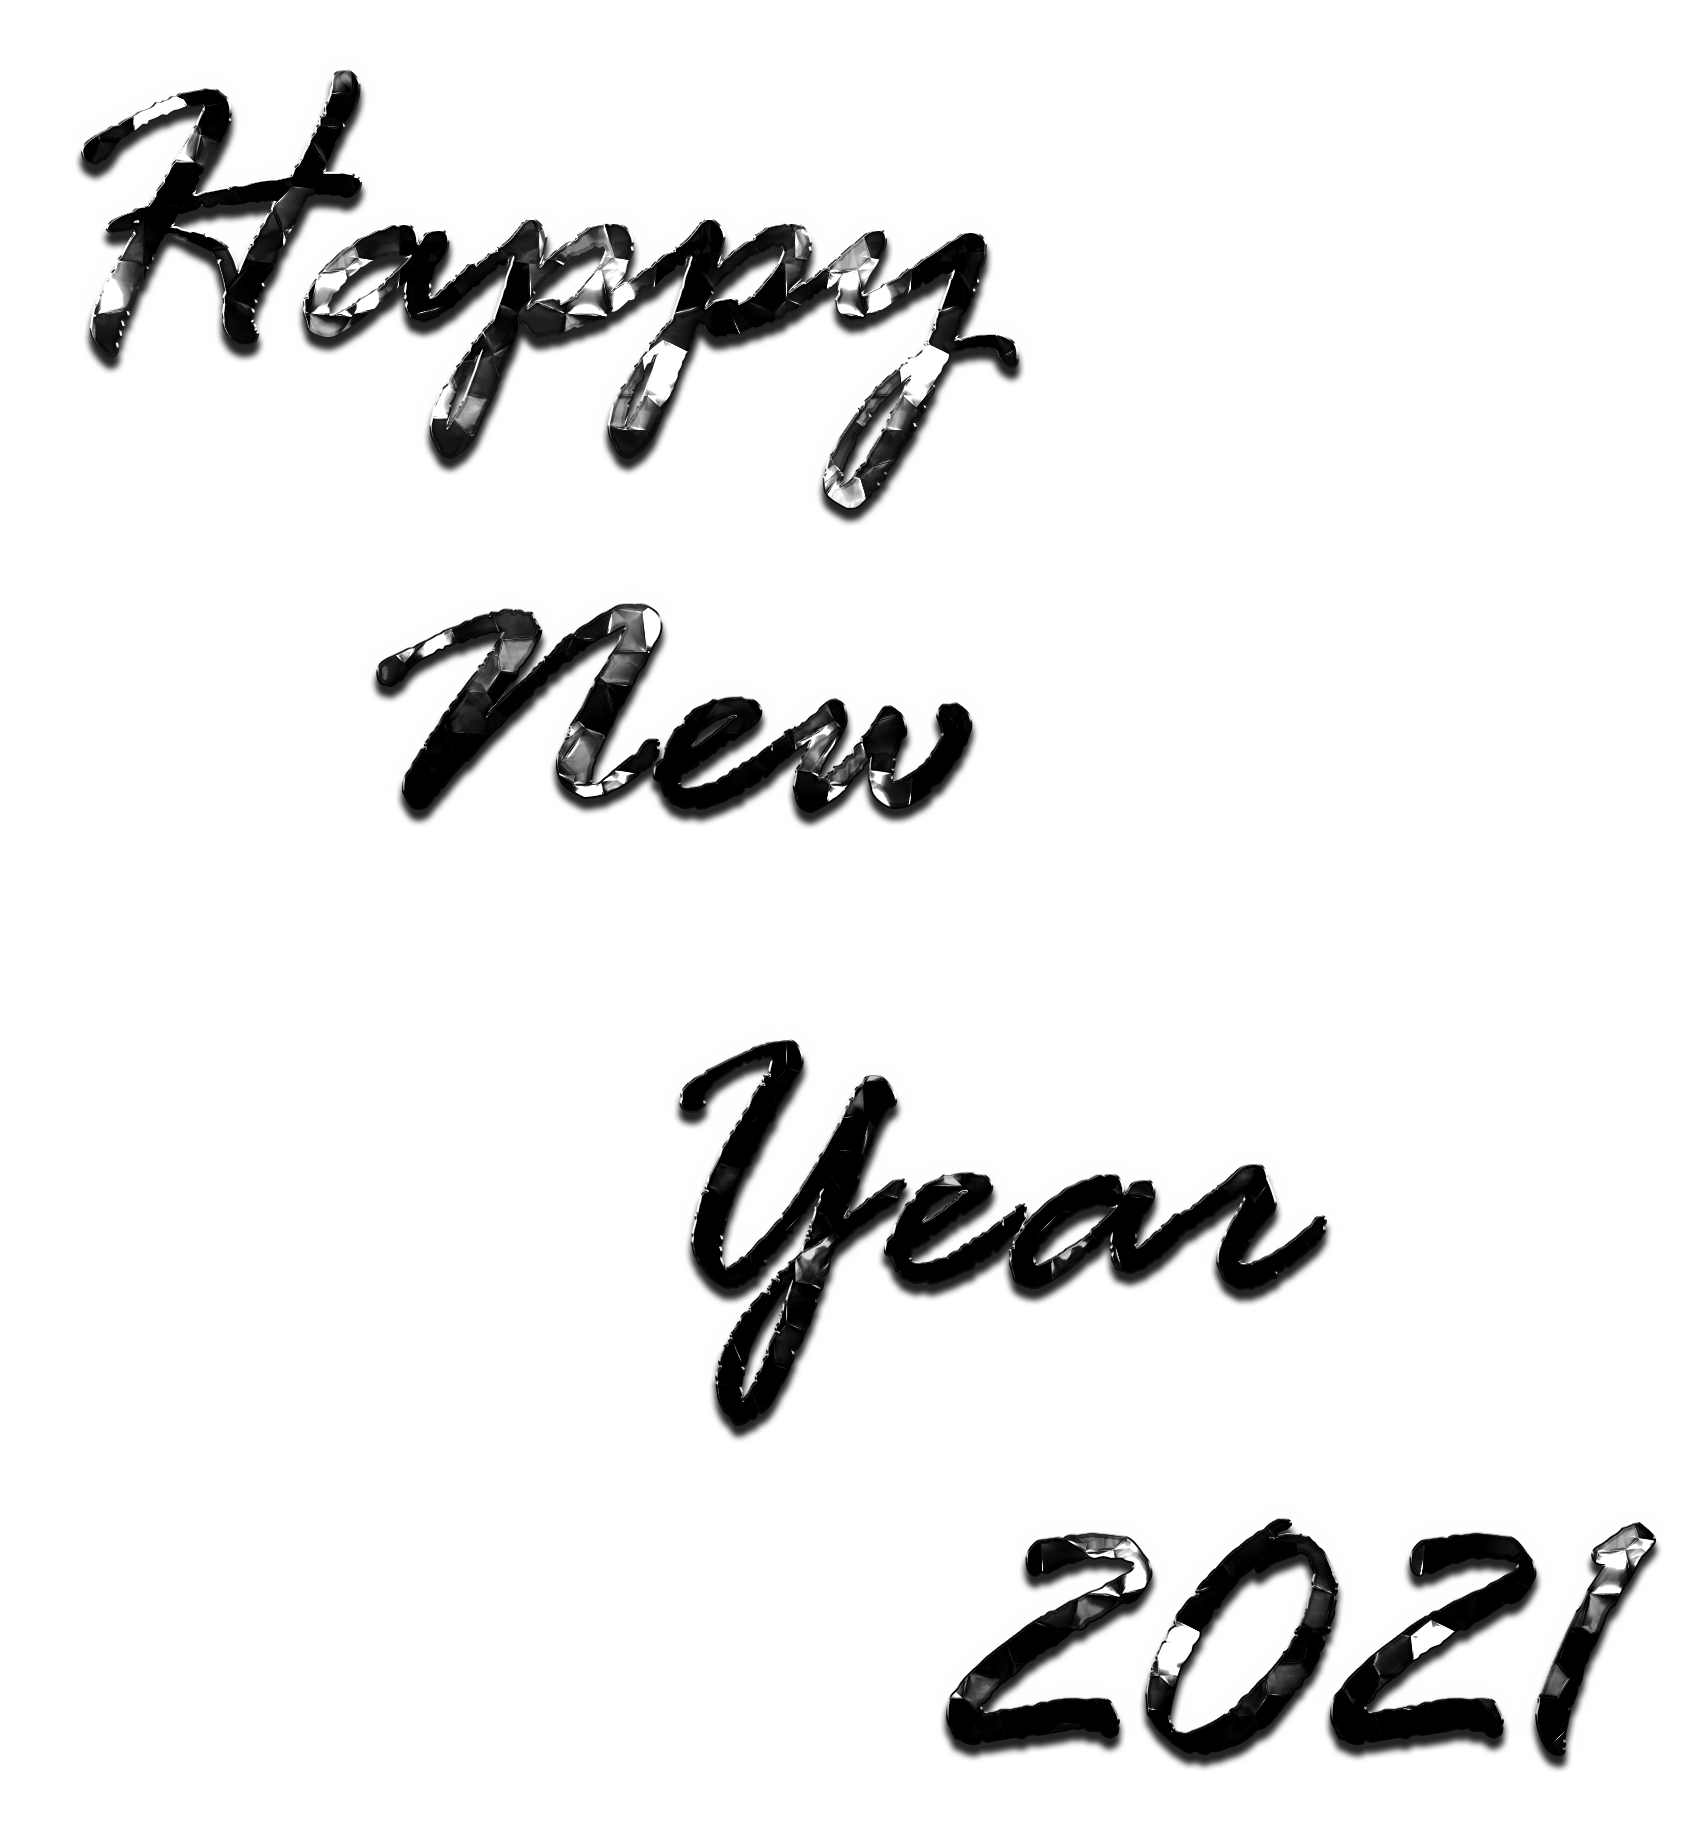 Happy New Year 2021 PNG Transparent Images, Pictures, Photos | PNG Arts